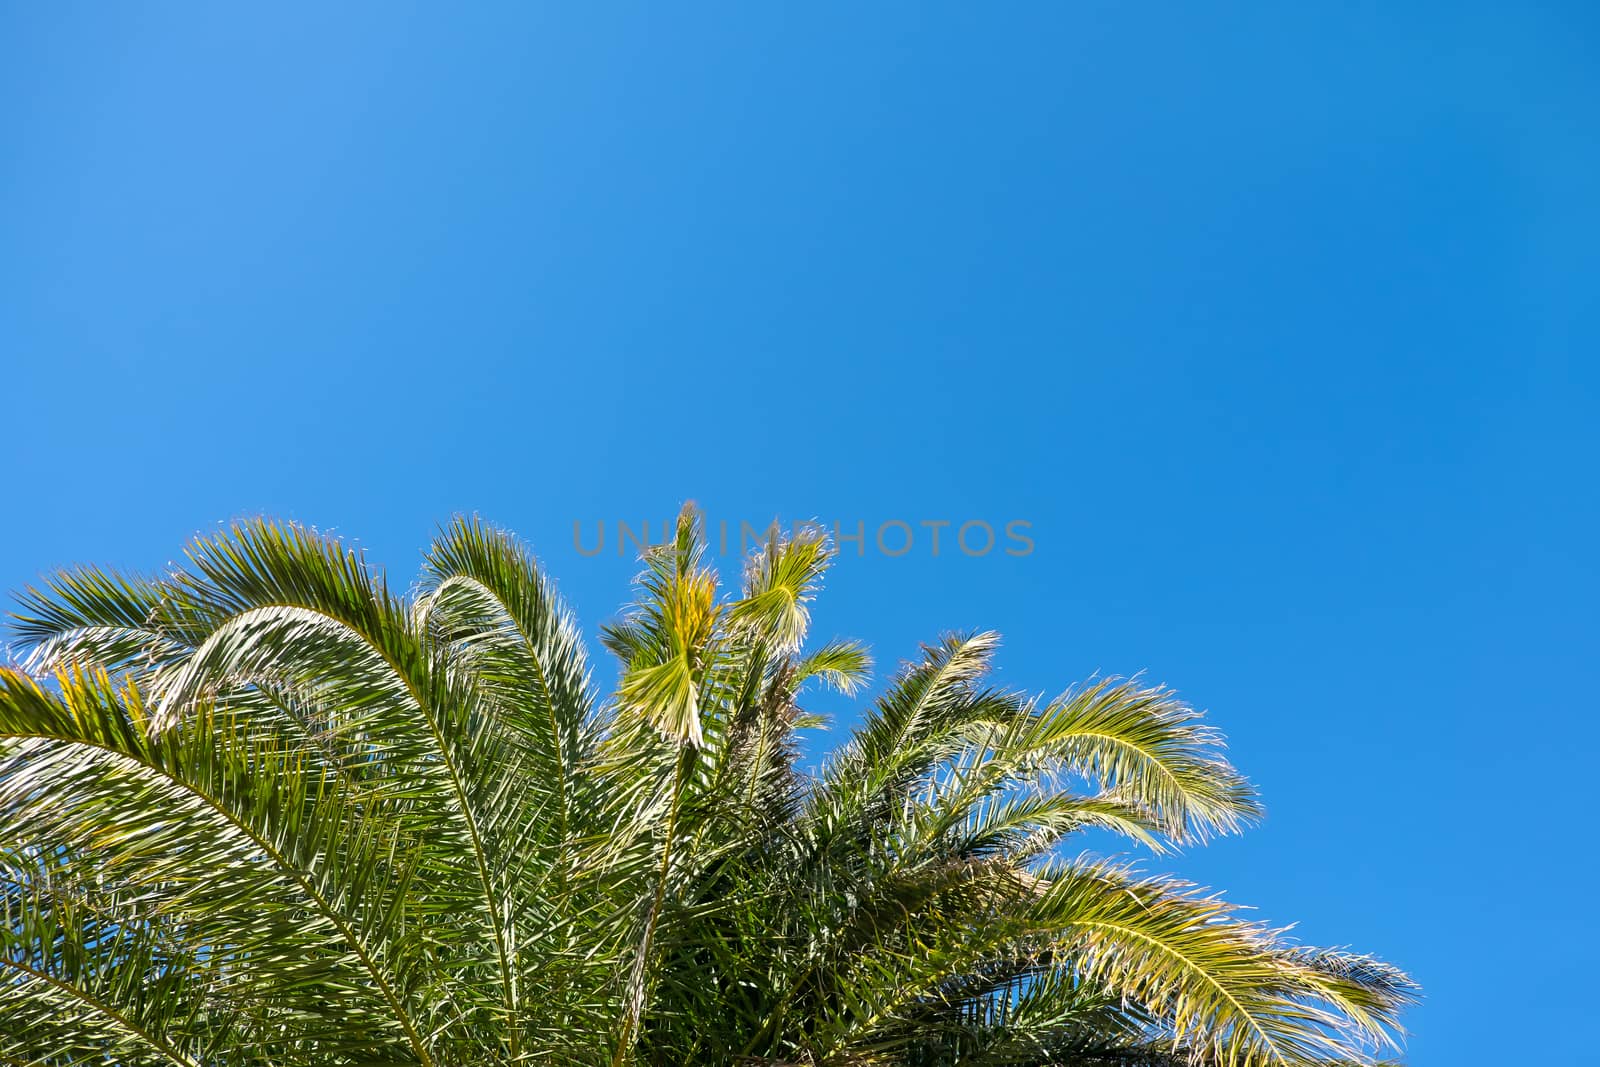 Palm leaves in sunshine on clear cloudless blue sky background, copy space. Concept summertime, vacation, tropics, nature, exotic places. For social media, travel agencies. Bottom view.